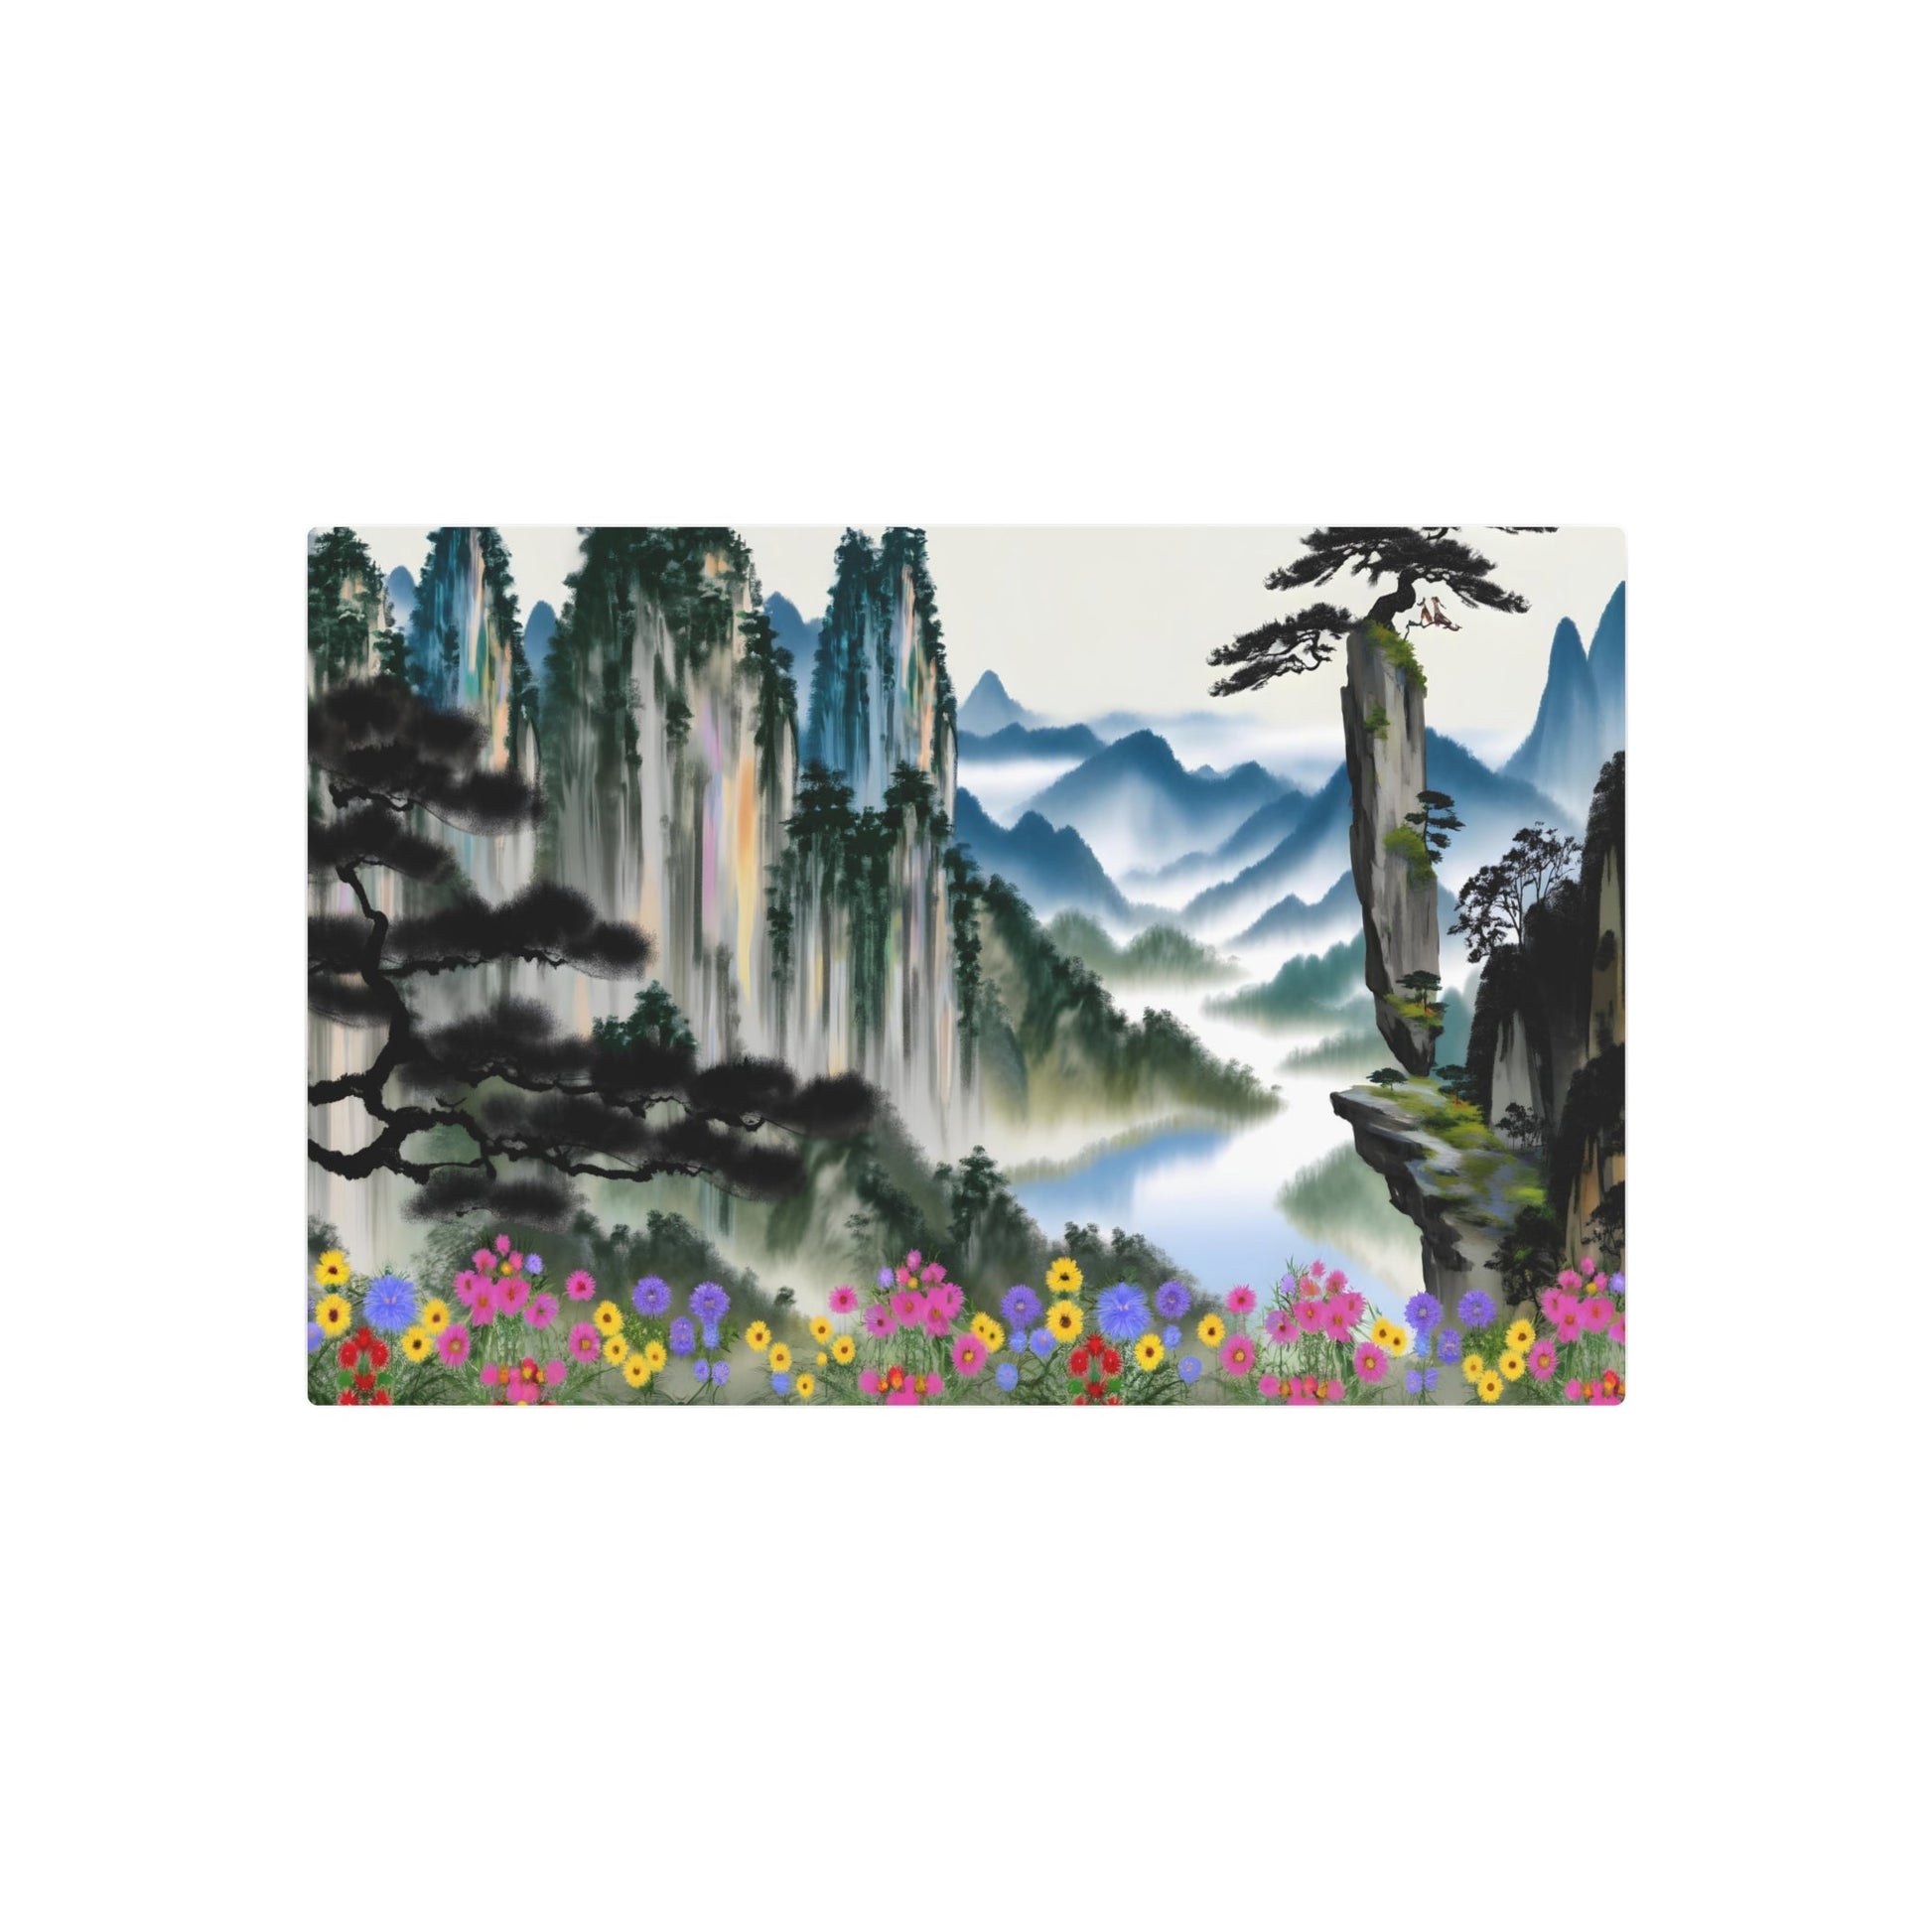 Metal Poster Art | "Harmony in Nature: Traditional Chinese Landscape Art with Vibrant Wildflowers - Asian Art Styles Collection" - Metal Poster Art 30″ x 20″ (Horizontal) 0.12''